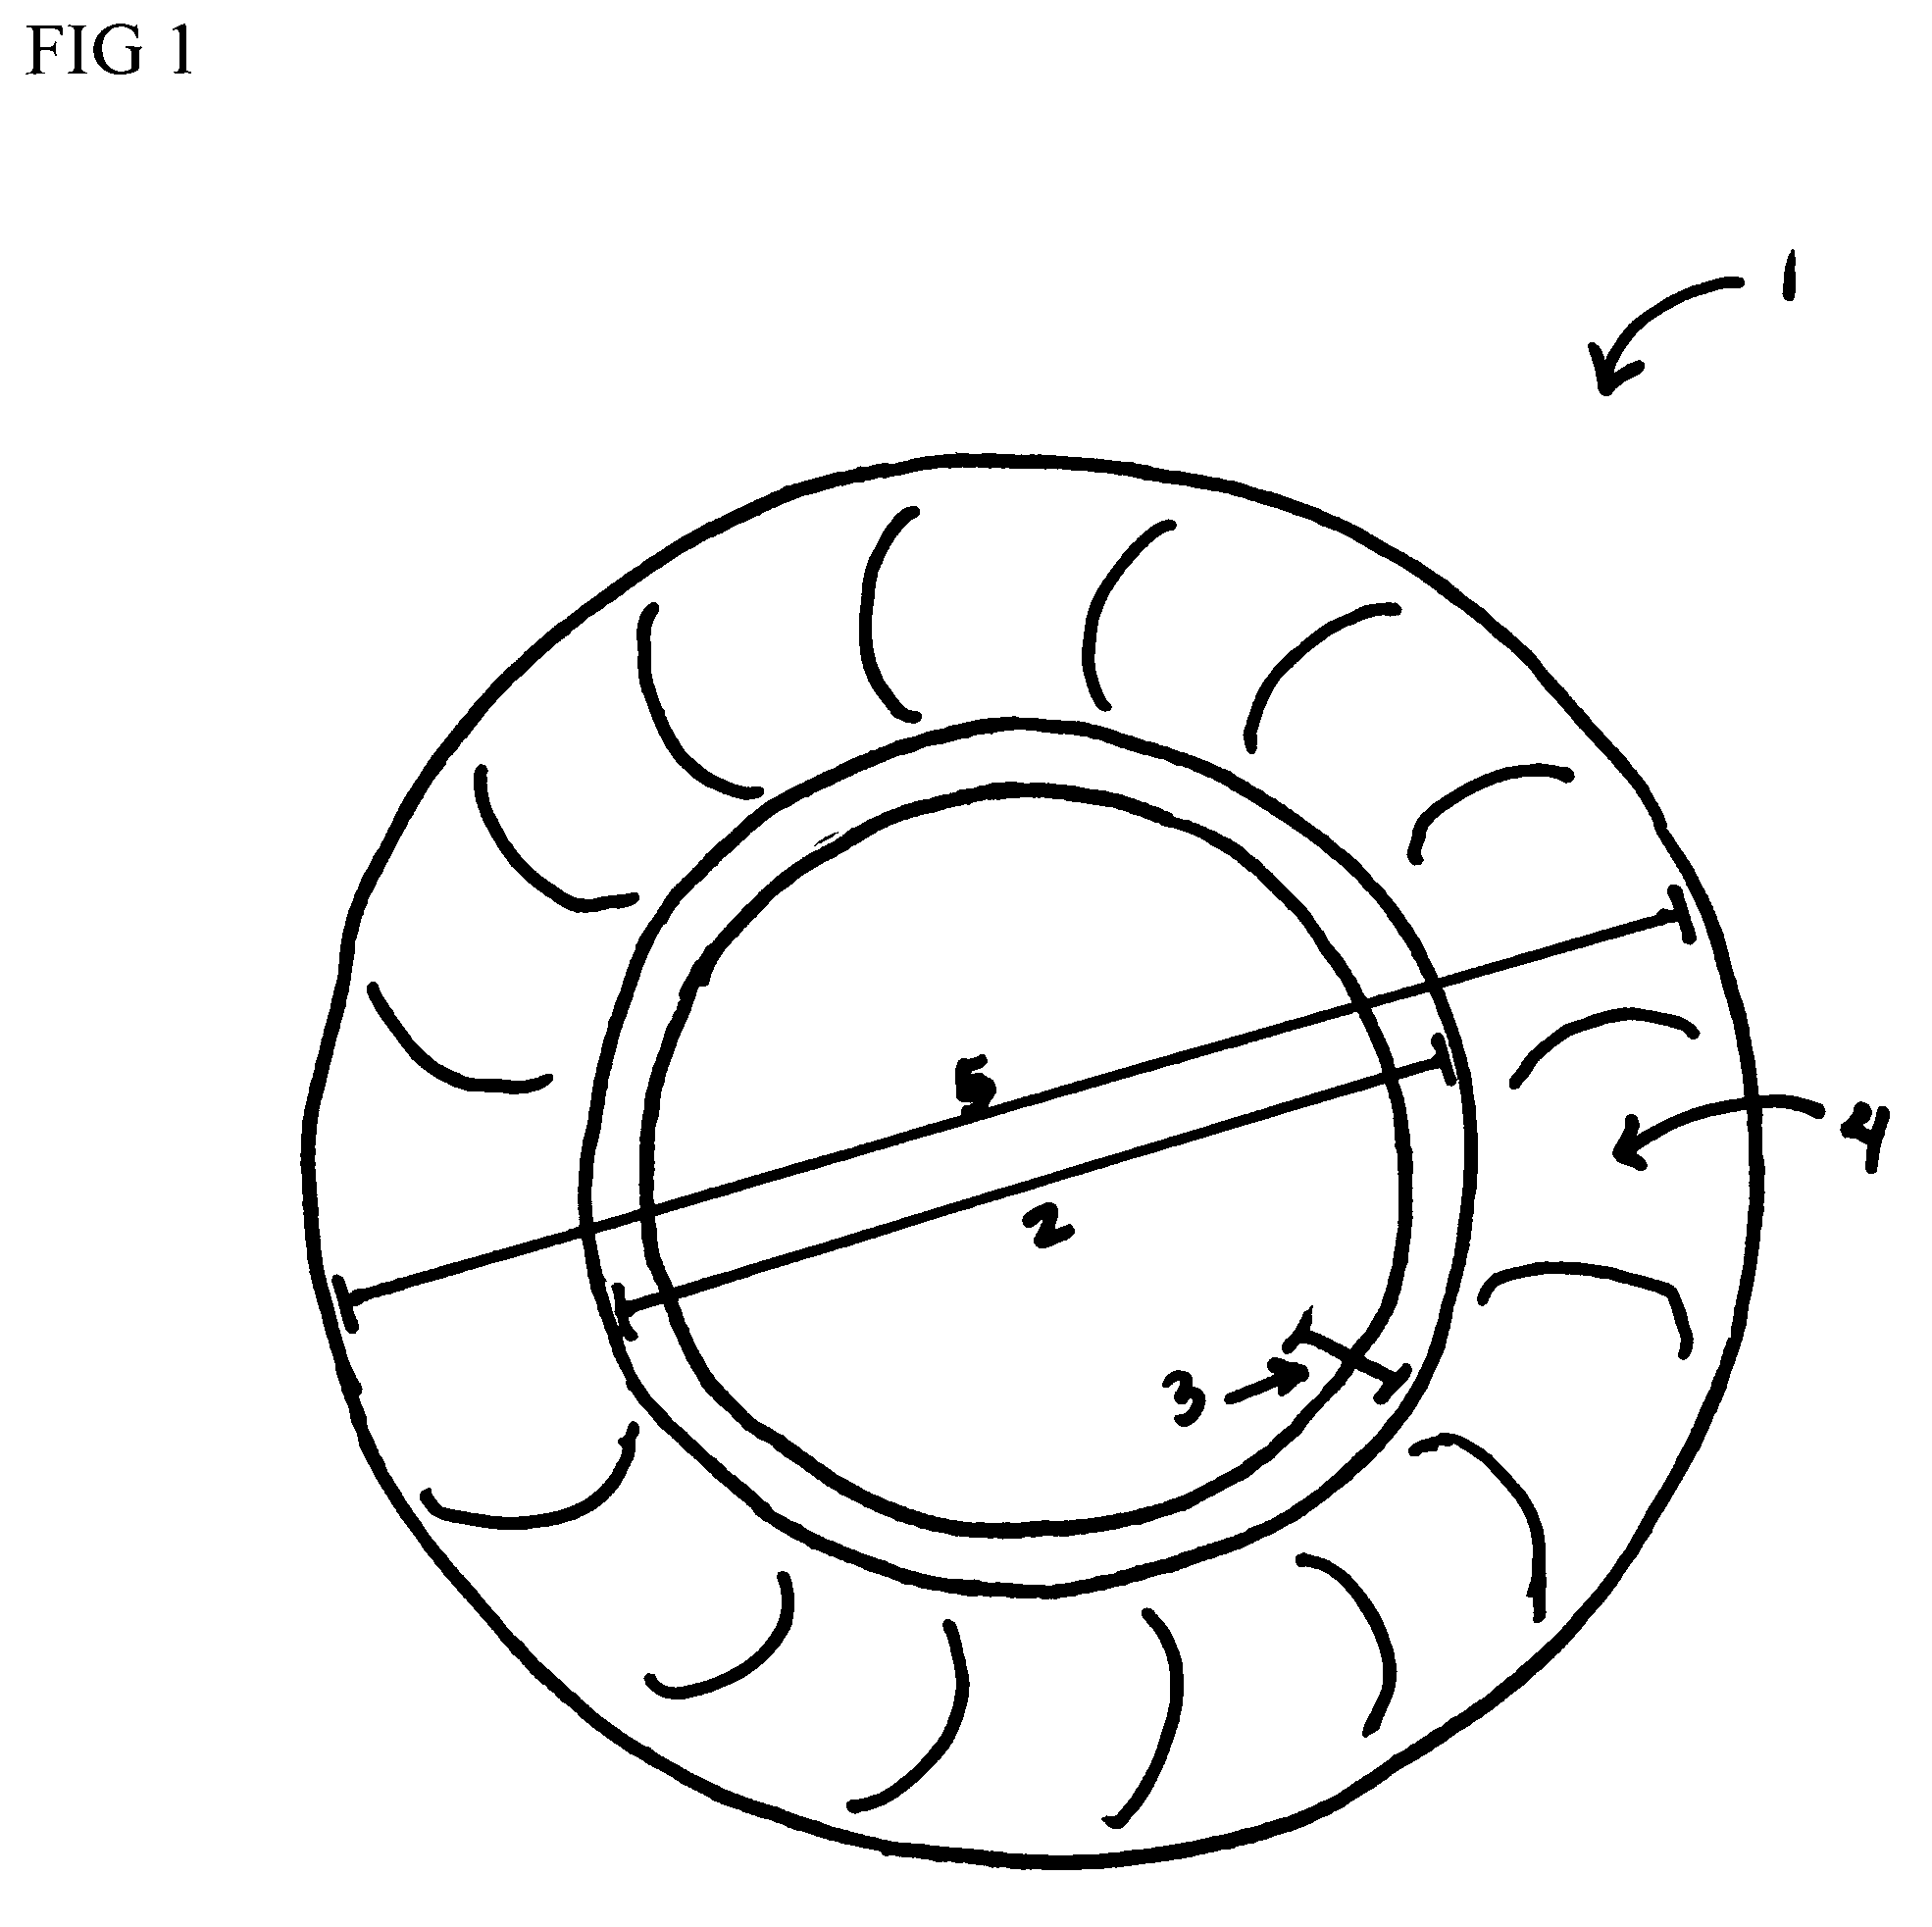 Accommodating or focusable contact lens